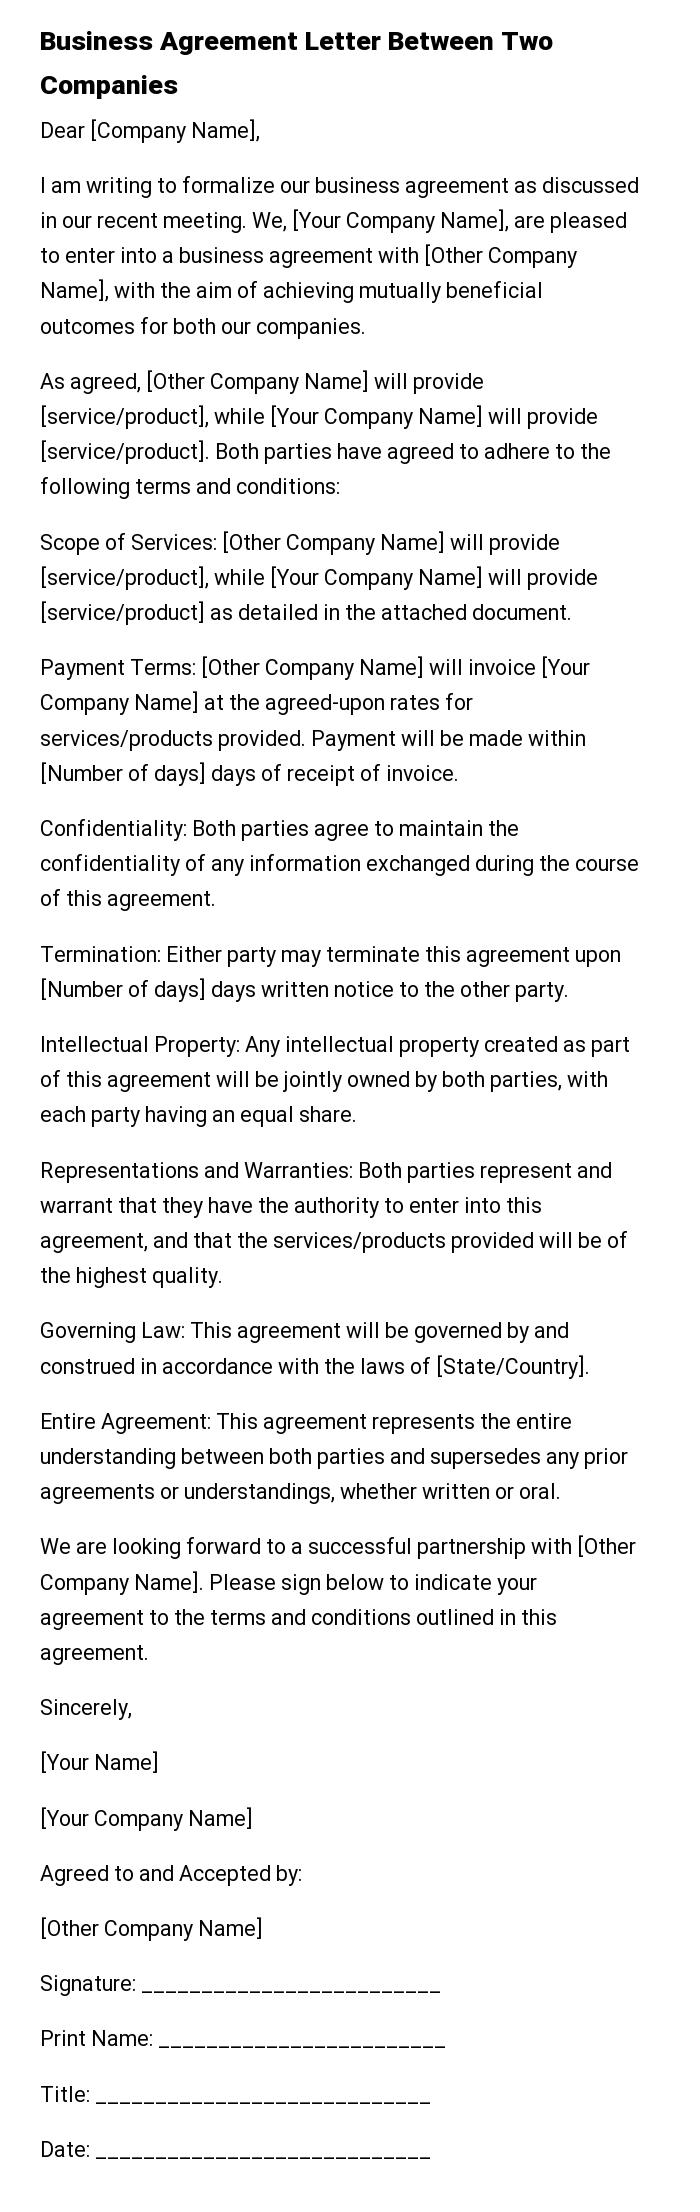 Business Agreement Letter Between Two Companies